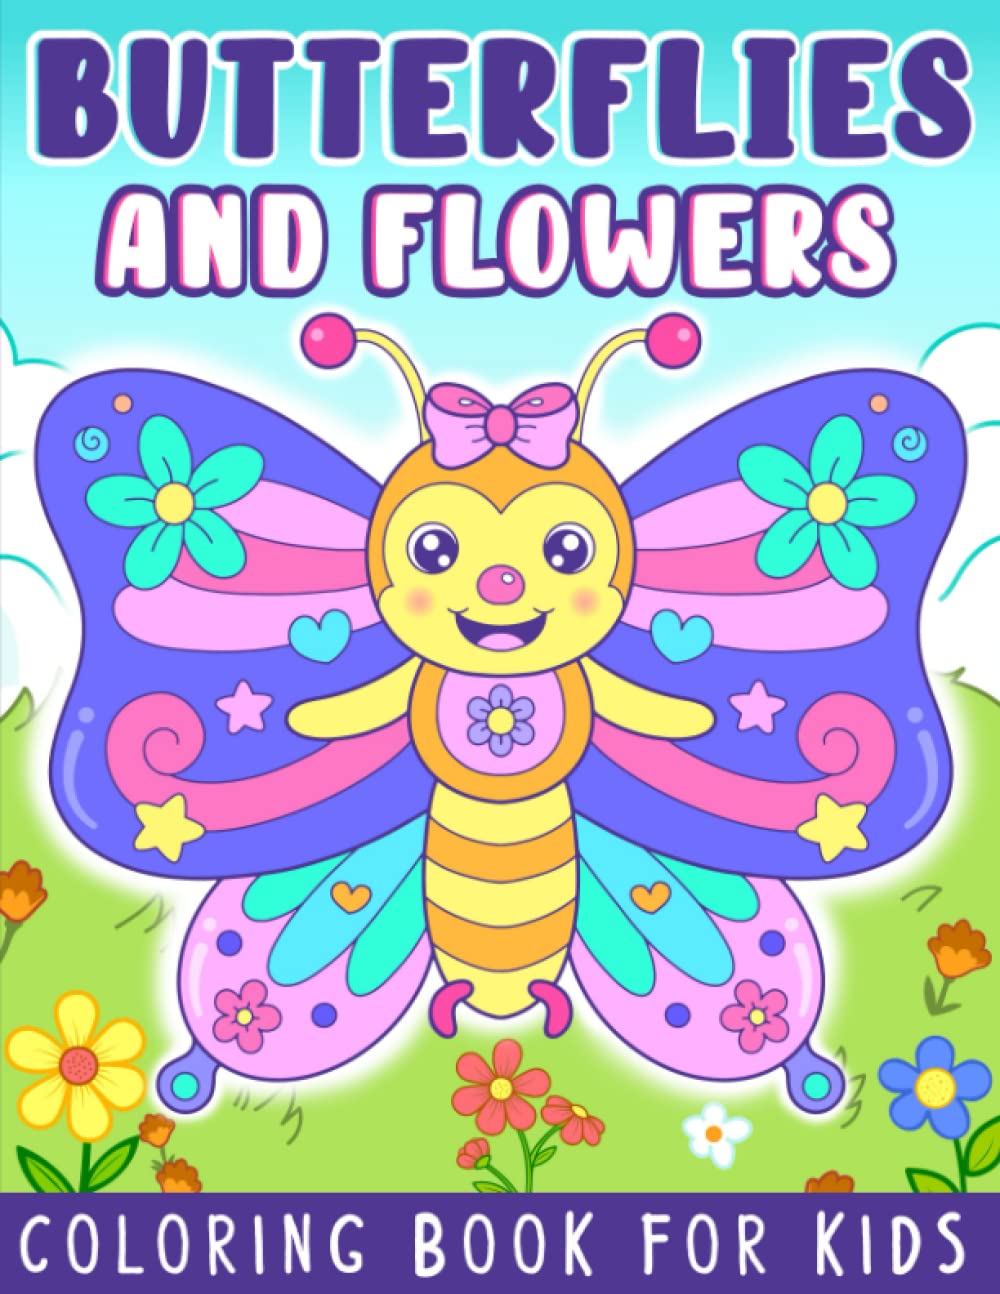 Butterflies and Flowers Coloring Book: Easy and Cute Style Coloring Pages of Different Beautiful Butterflies and Flowers for Boys Girls Kids Ages 4-8 (Let's Color Butterflies)